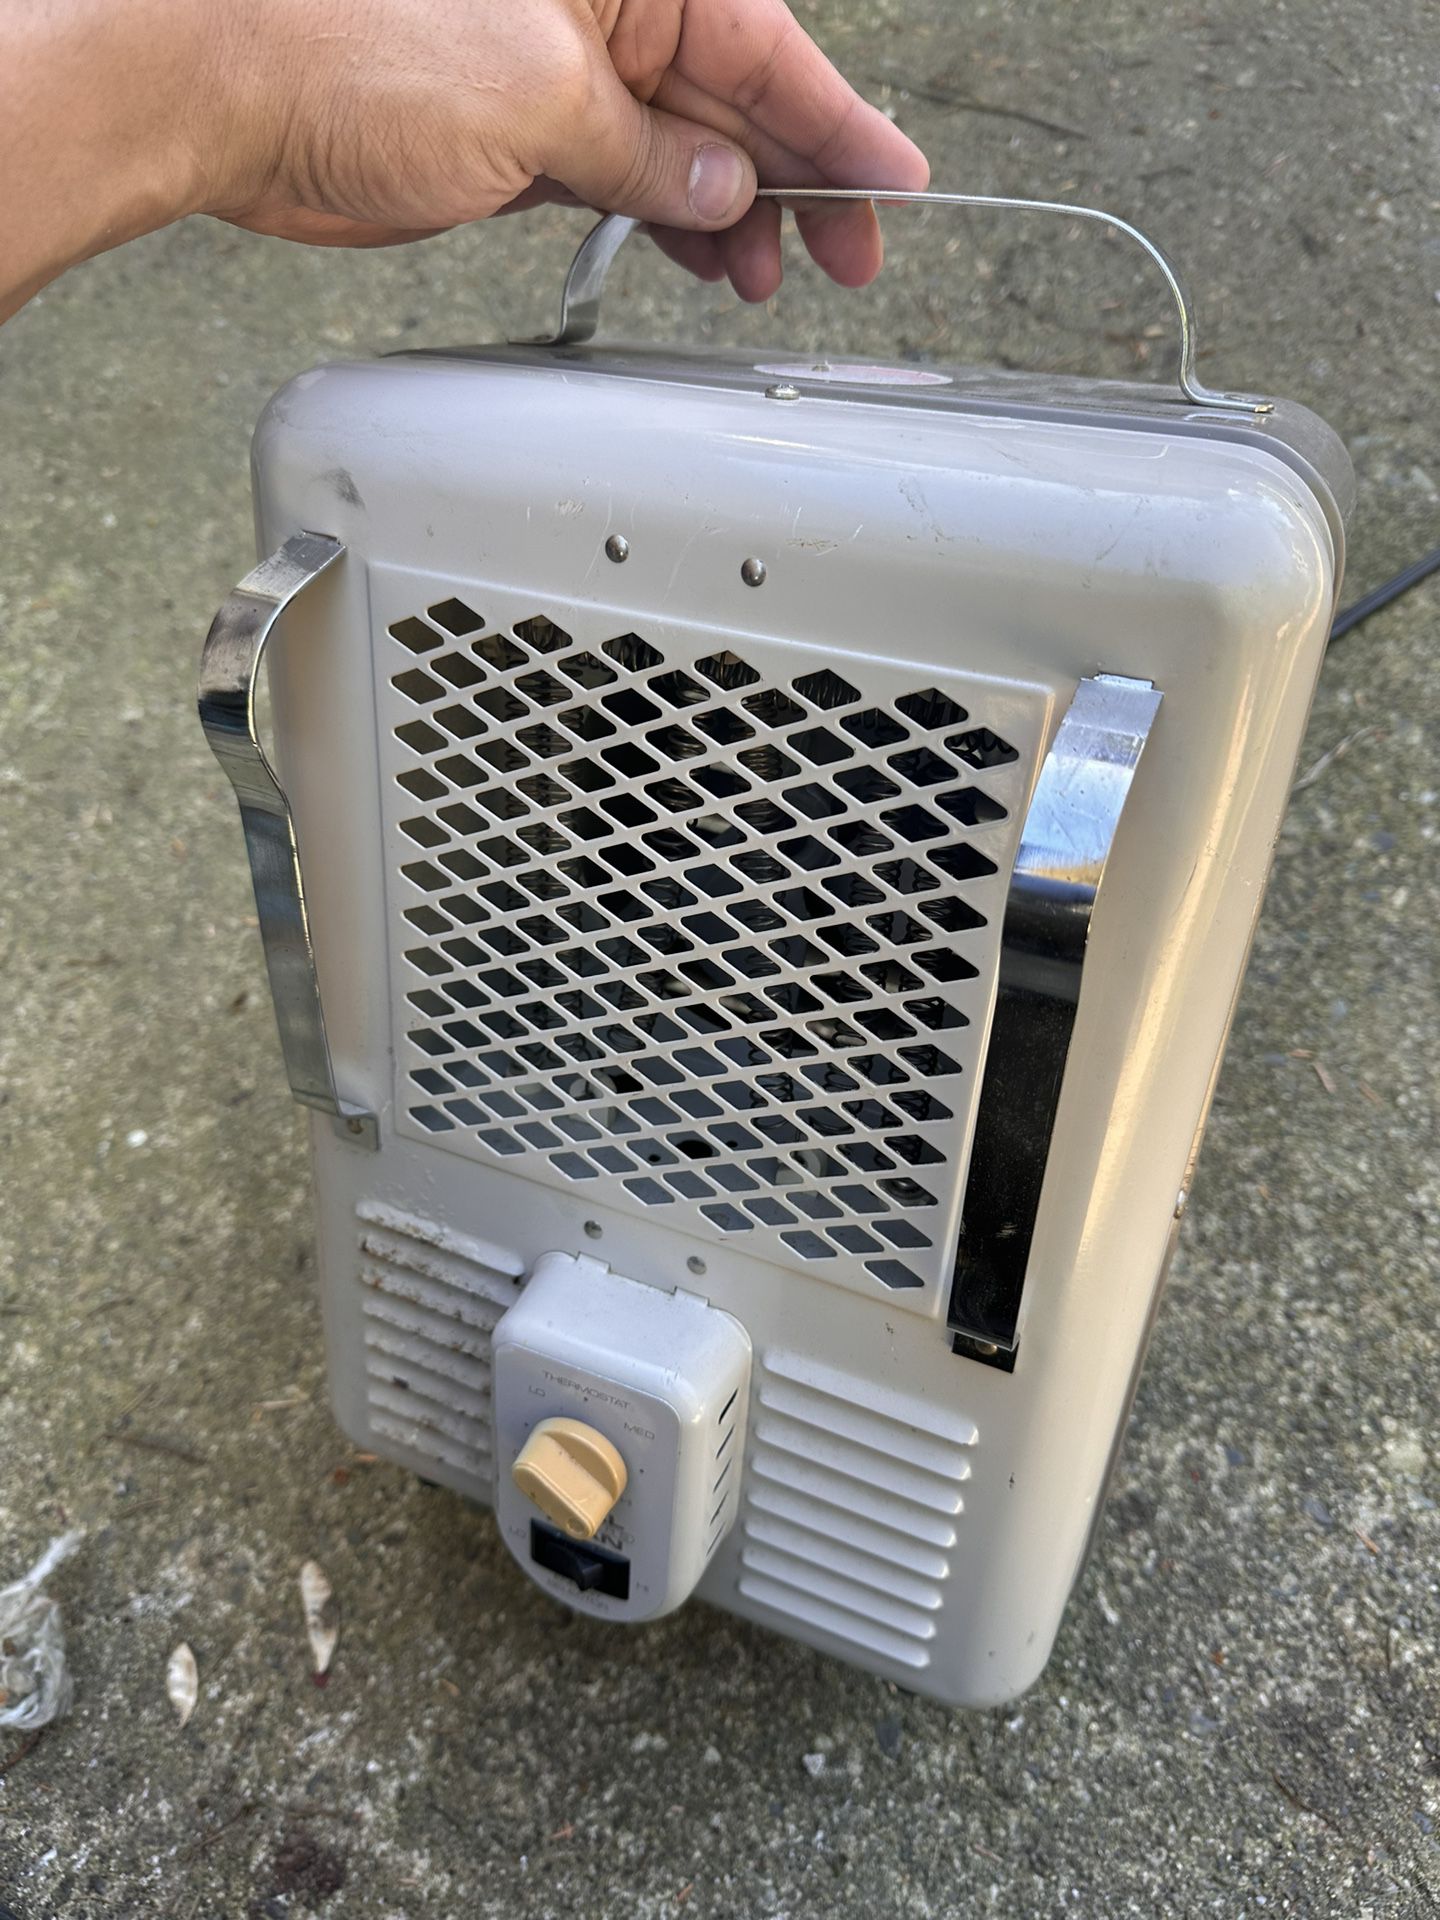 Space Heater Metal Made Good Working Condition. 